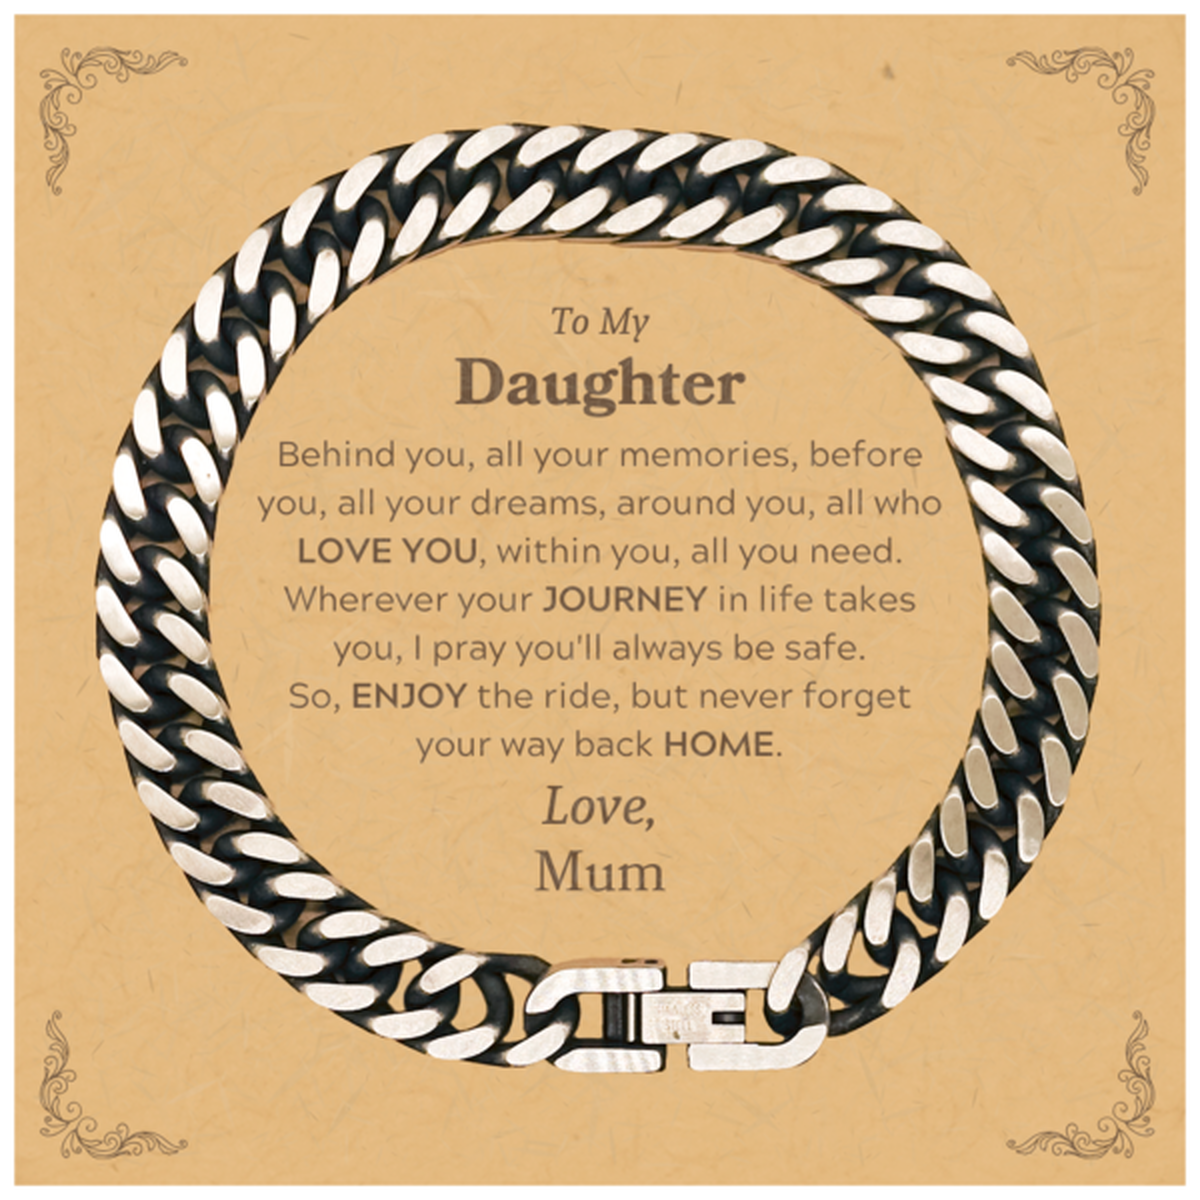 To My Daughter Graduation Gifts from Mum, Daughter Cuban Link Chain Bracelet Christmas Birthday Gifts for Daughter Behind you, all your memories, before you, all your dreams. Love, Mum